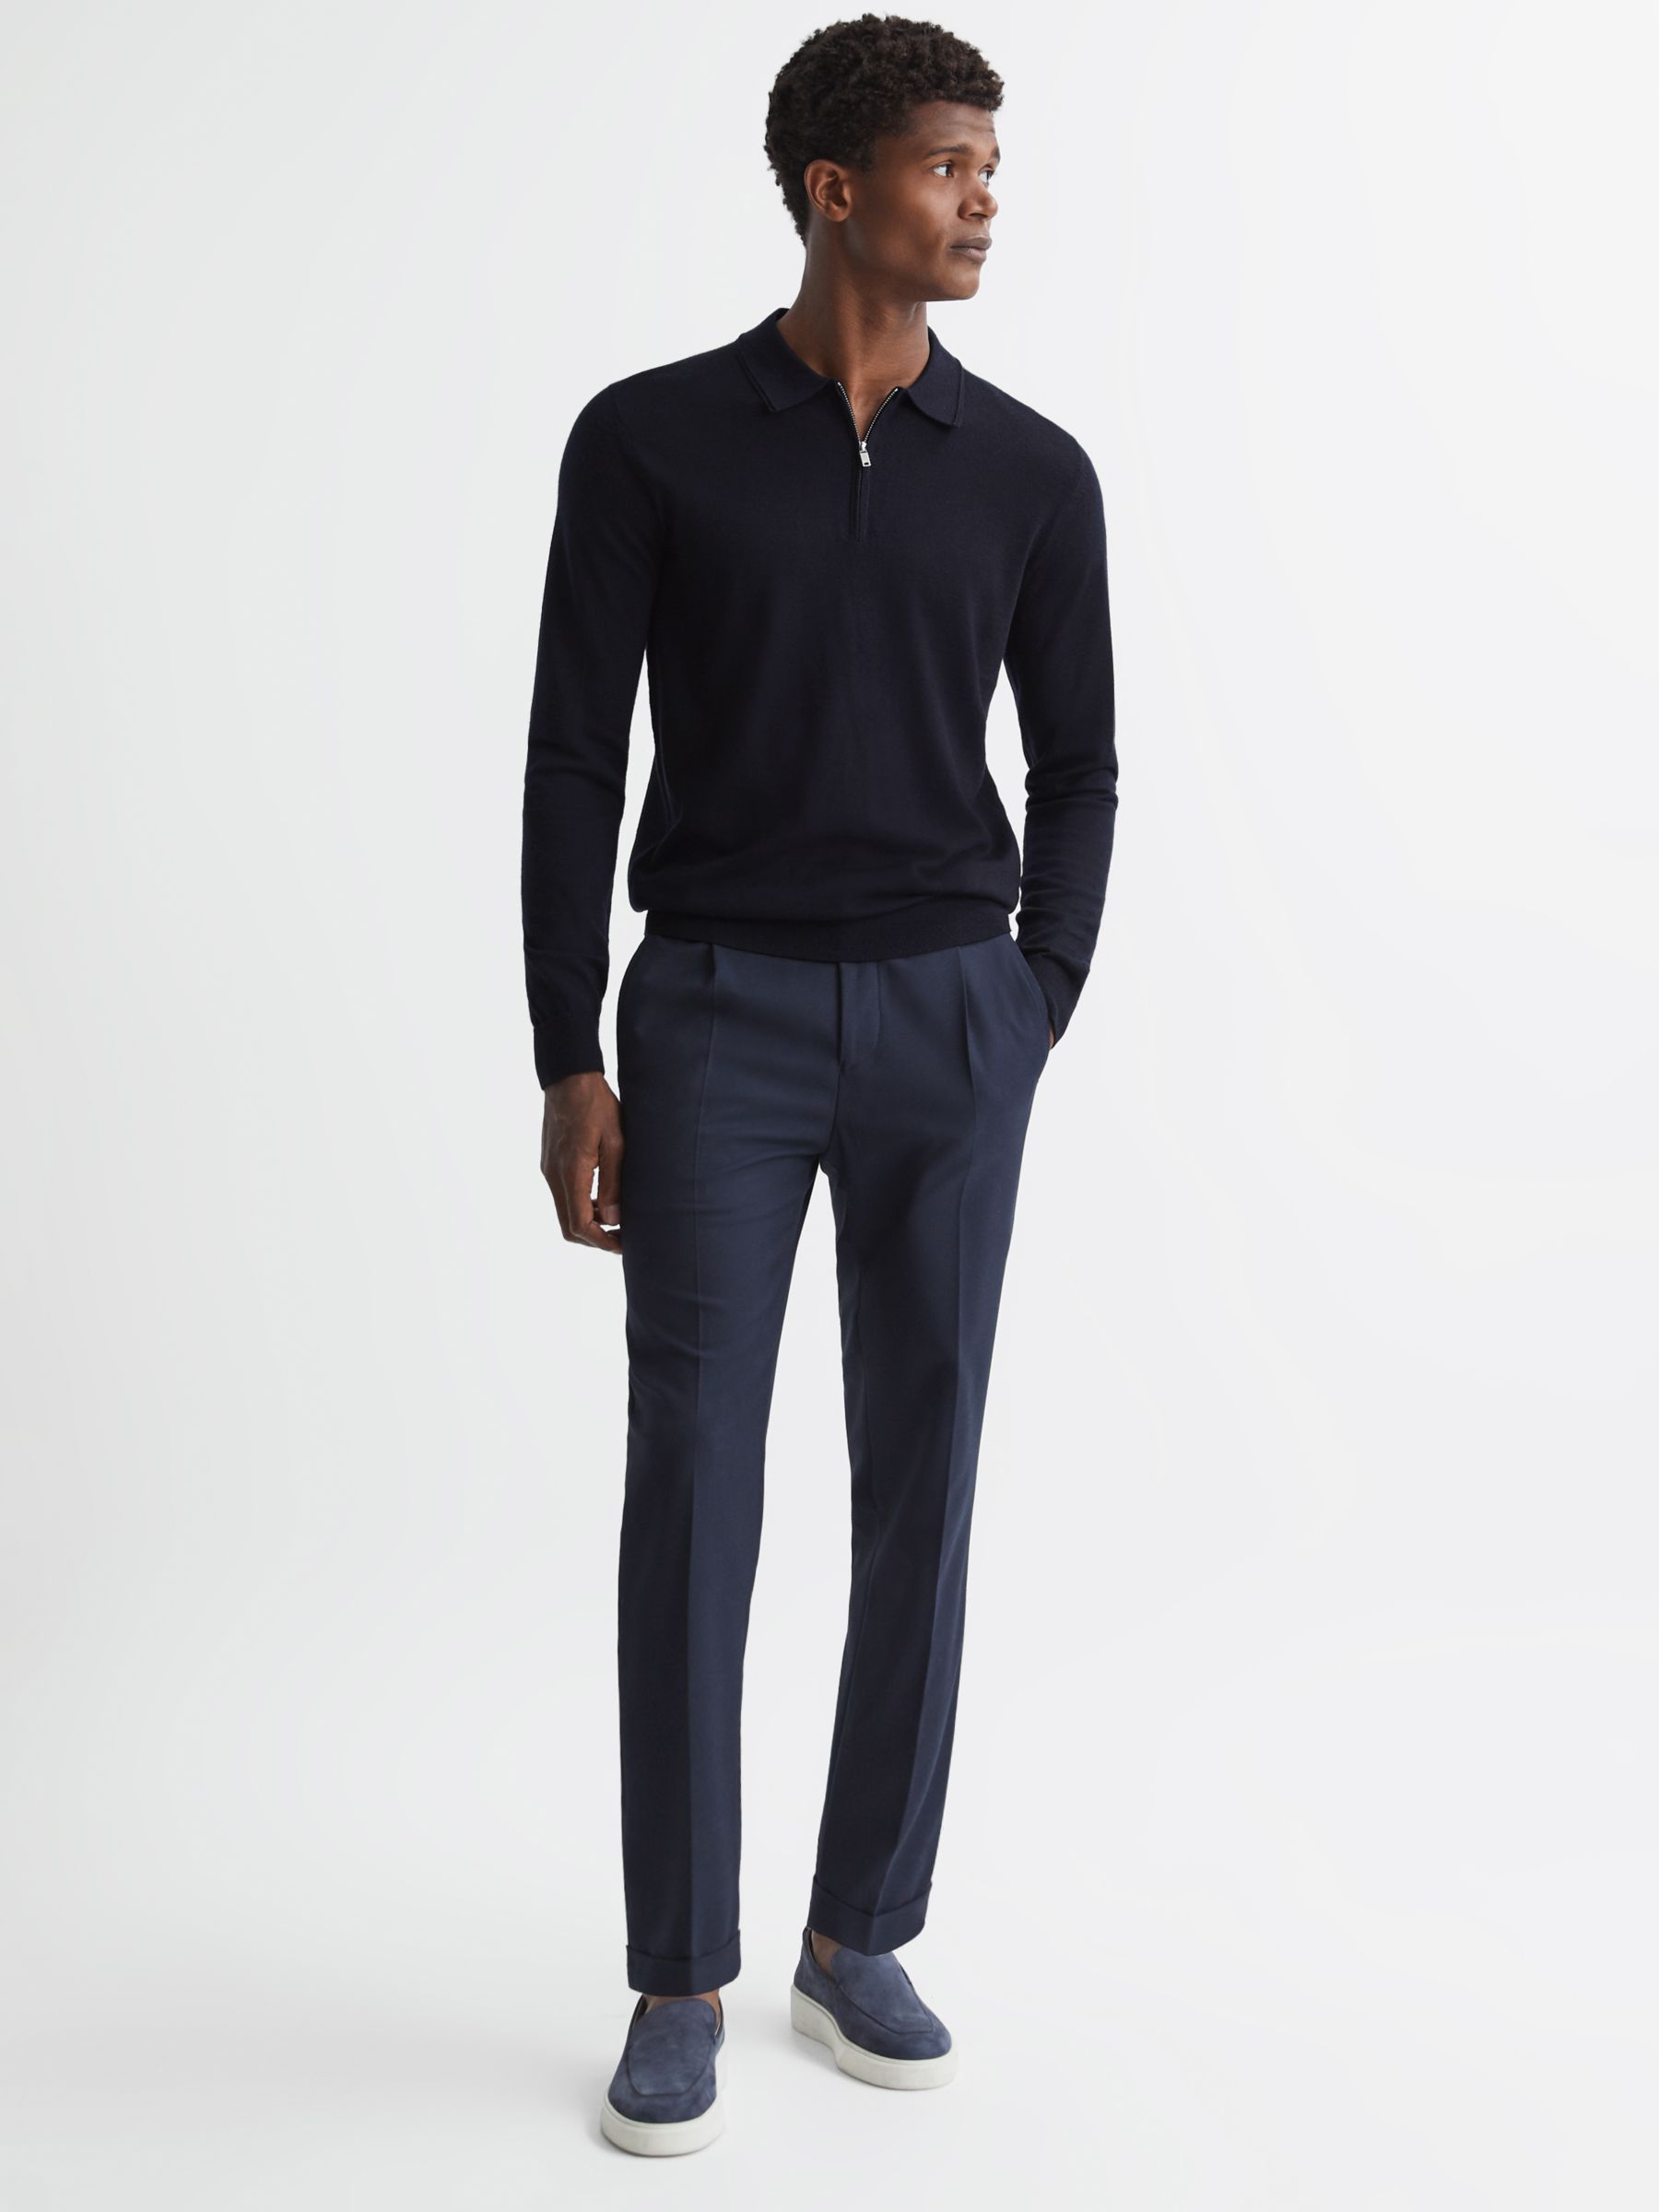 Reiss Robertson Knitted Long Sleeve Polo Top, Navy at John Lewis & Partners